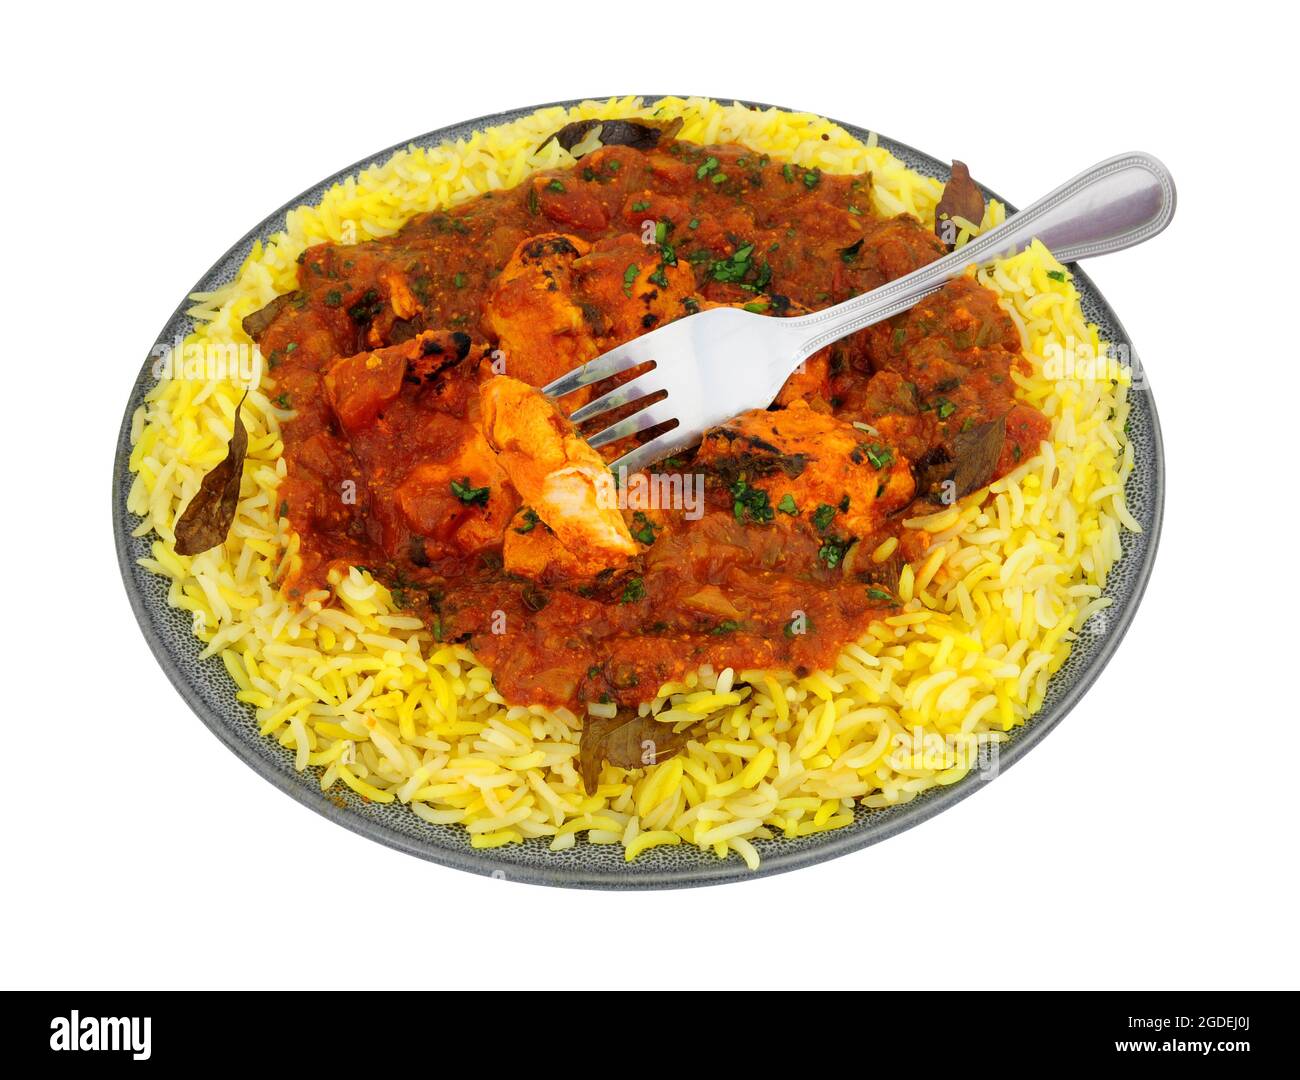 Indian chicken jalfrezi curry meal with fragrant pilau rice isolated on a white background Stock Photo